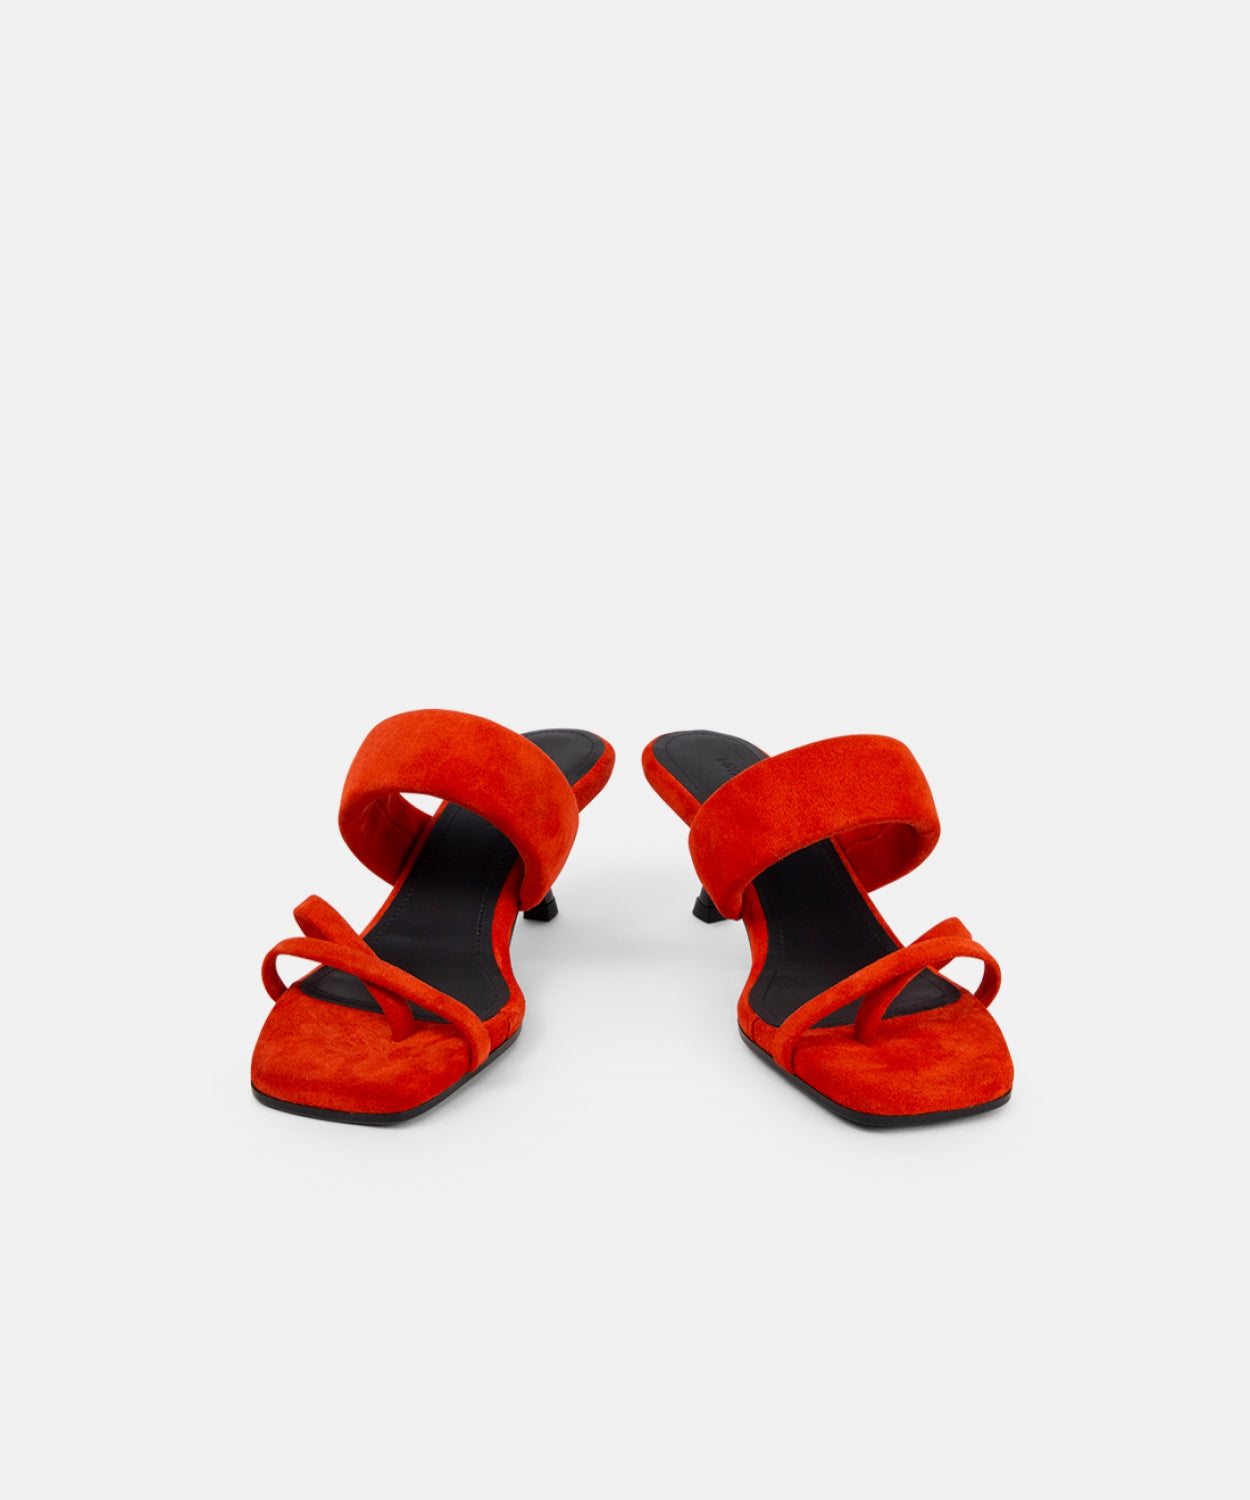 Atomic Strappy Sandal Suede 241 | Red